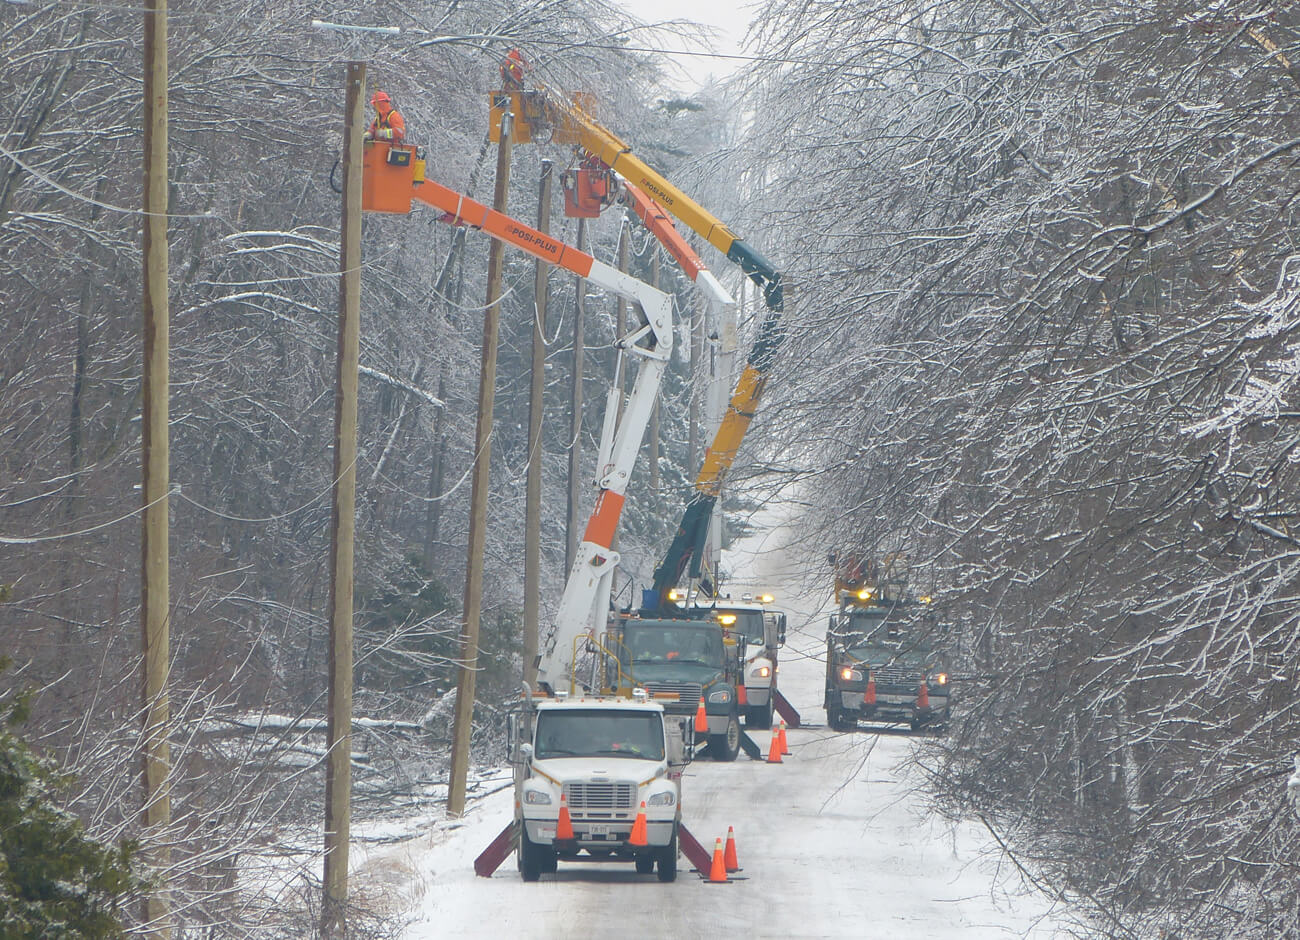 Alectra crew working to restore power on a snowy road.